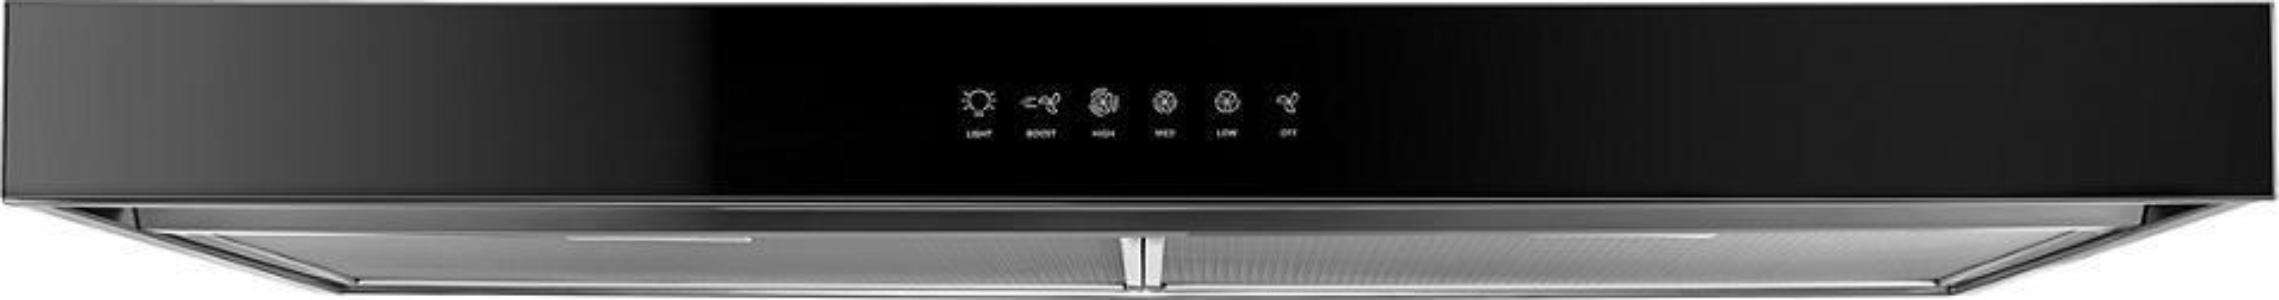 Maytag30" Range Hood with Boost Function